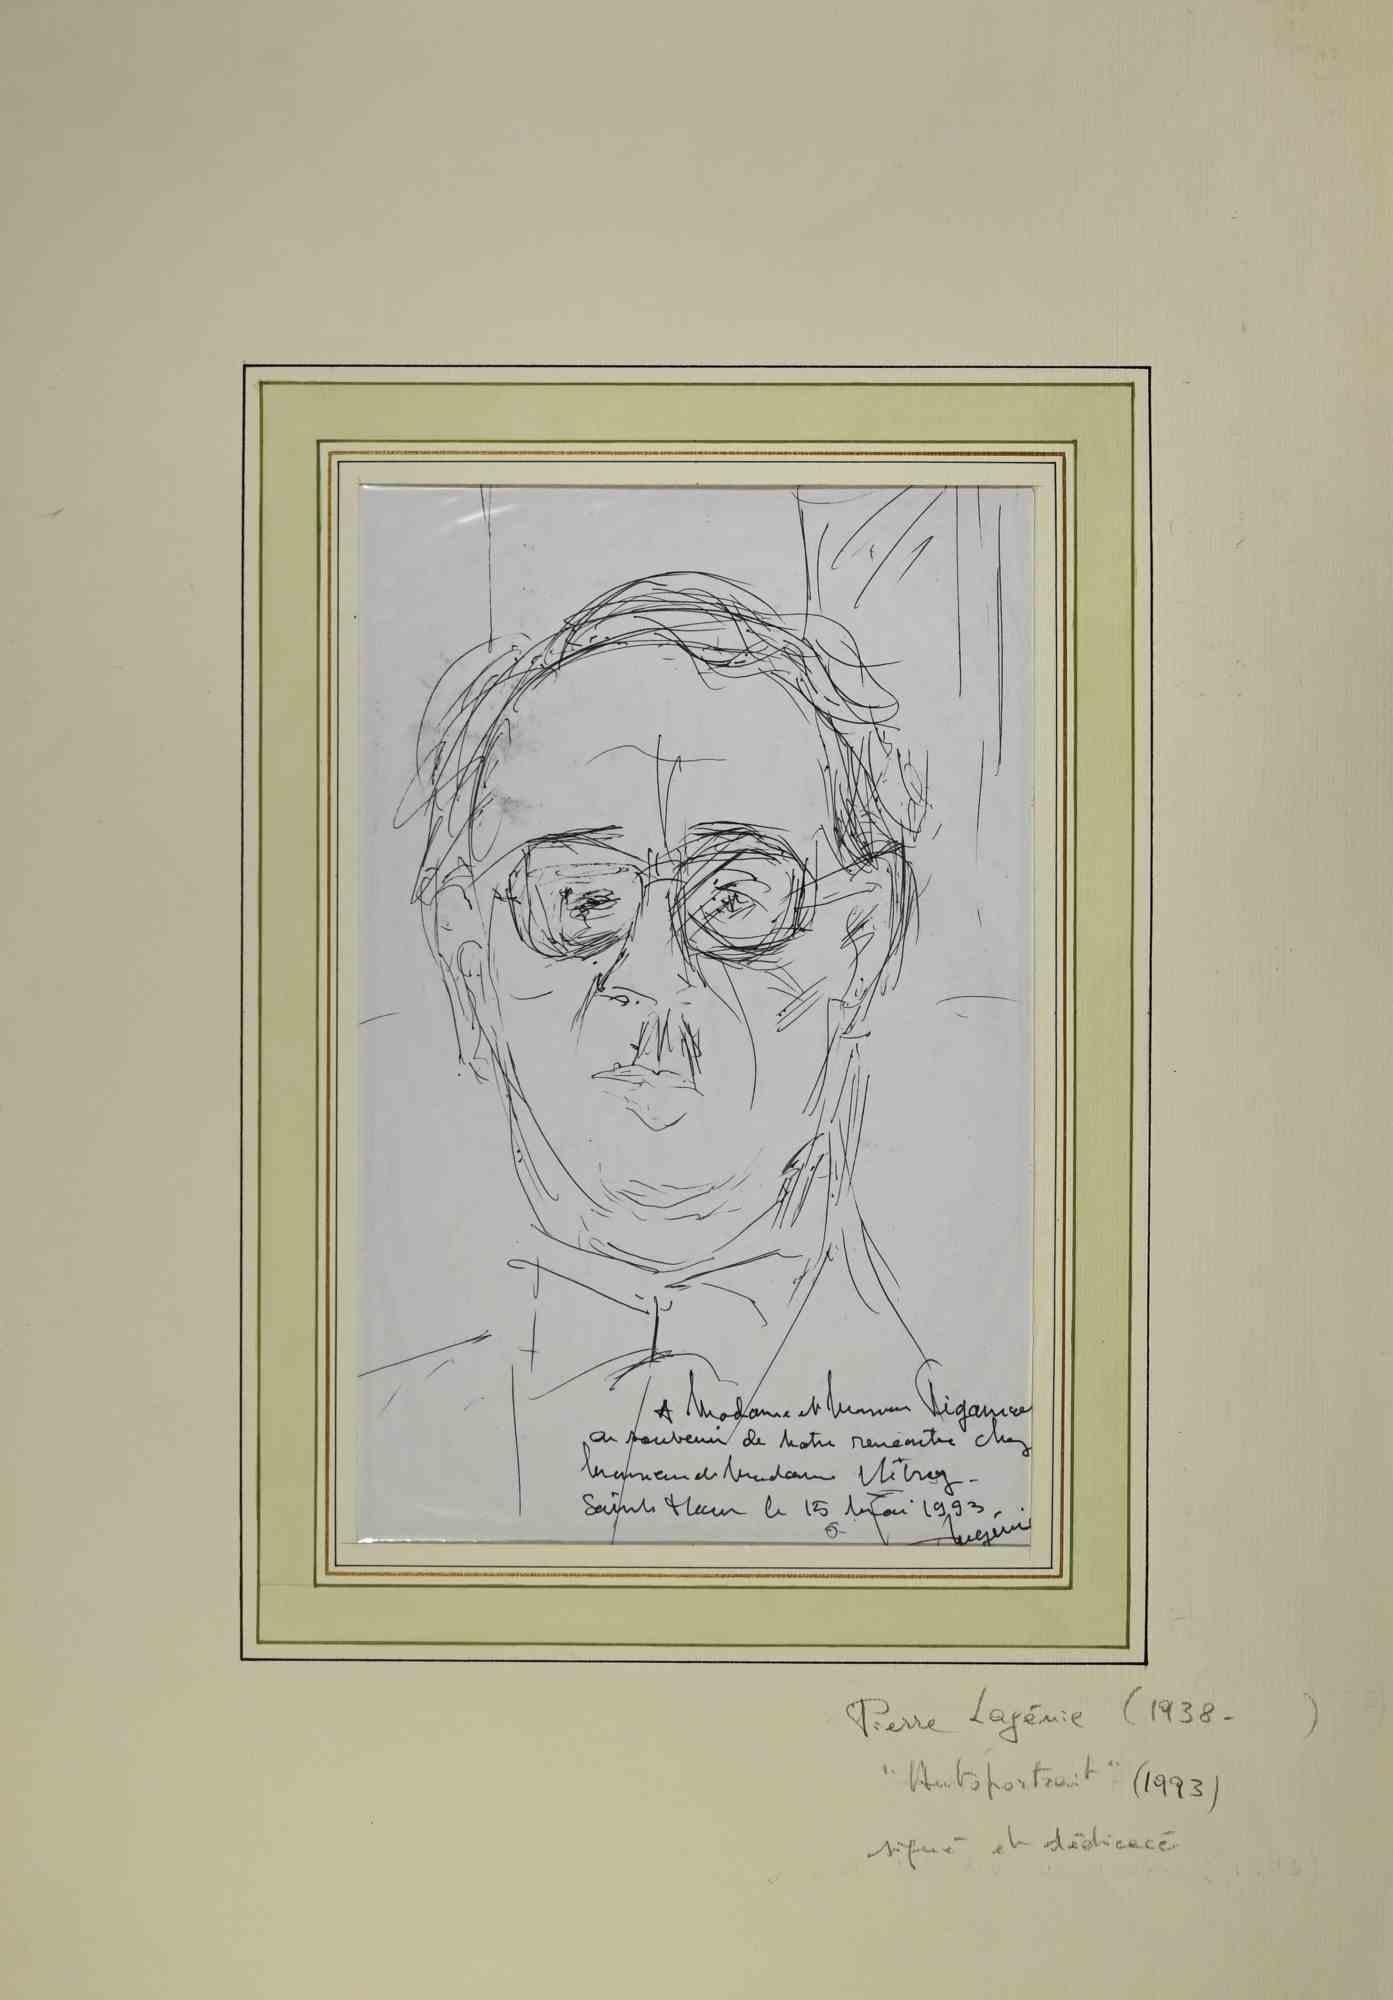 Self portrait is a beautiful pen drawing on paper, realized in 1993 by the French artist  Pierre Lagénie (1938-2020).

Hand-signed and dedicated on the lower right margin.

The work is glued on cardboard. Total dimensions: 50 x 35.5 cm.

In very